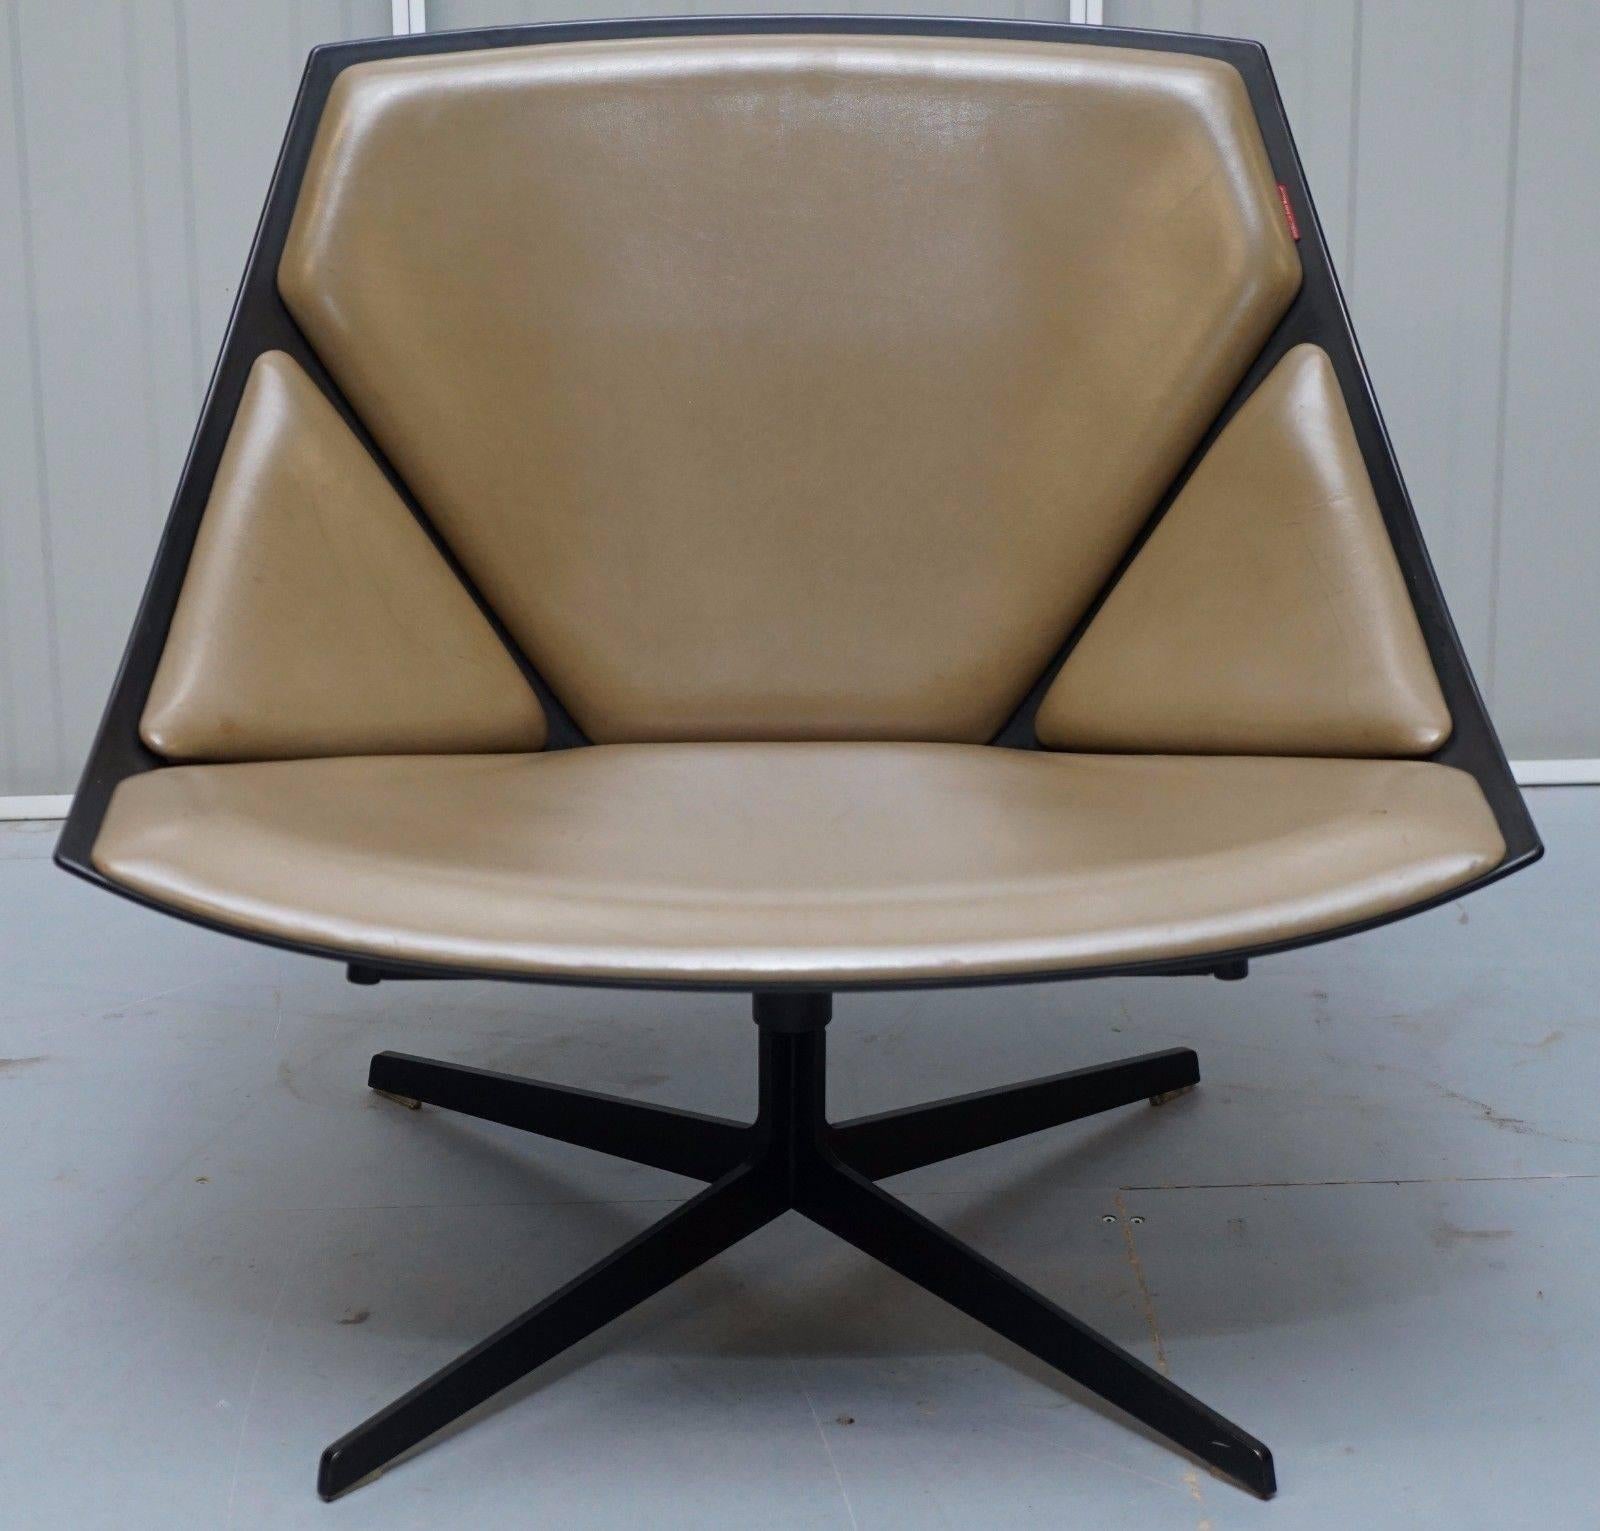 Lovely original fully stamped and labelled Fritz Hansen JL10 Lounge space chair RRP £3674

Please note the delivery fee listed is just a guide, for an accurate quote please send me your postcode and I’ll price it up for you
 
The Space series is